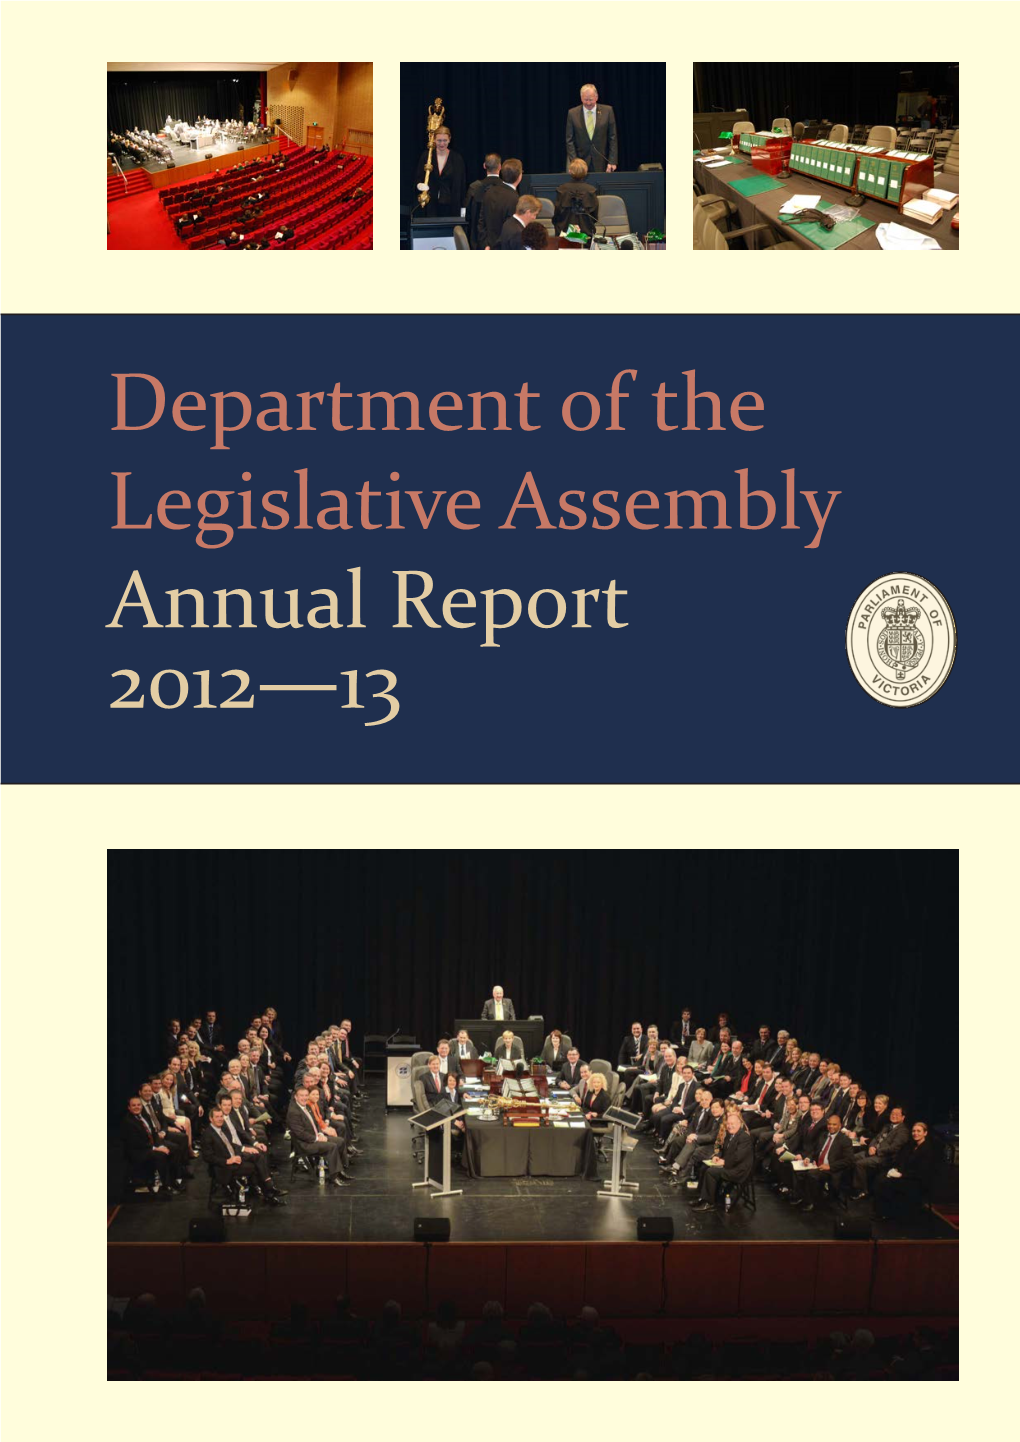 Department of the Legislative Assembly Annual Report 2012—13